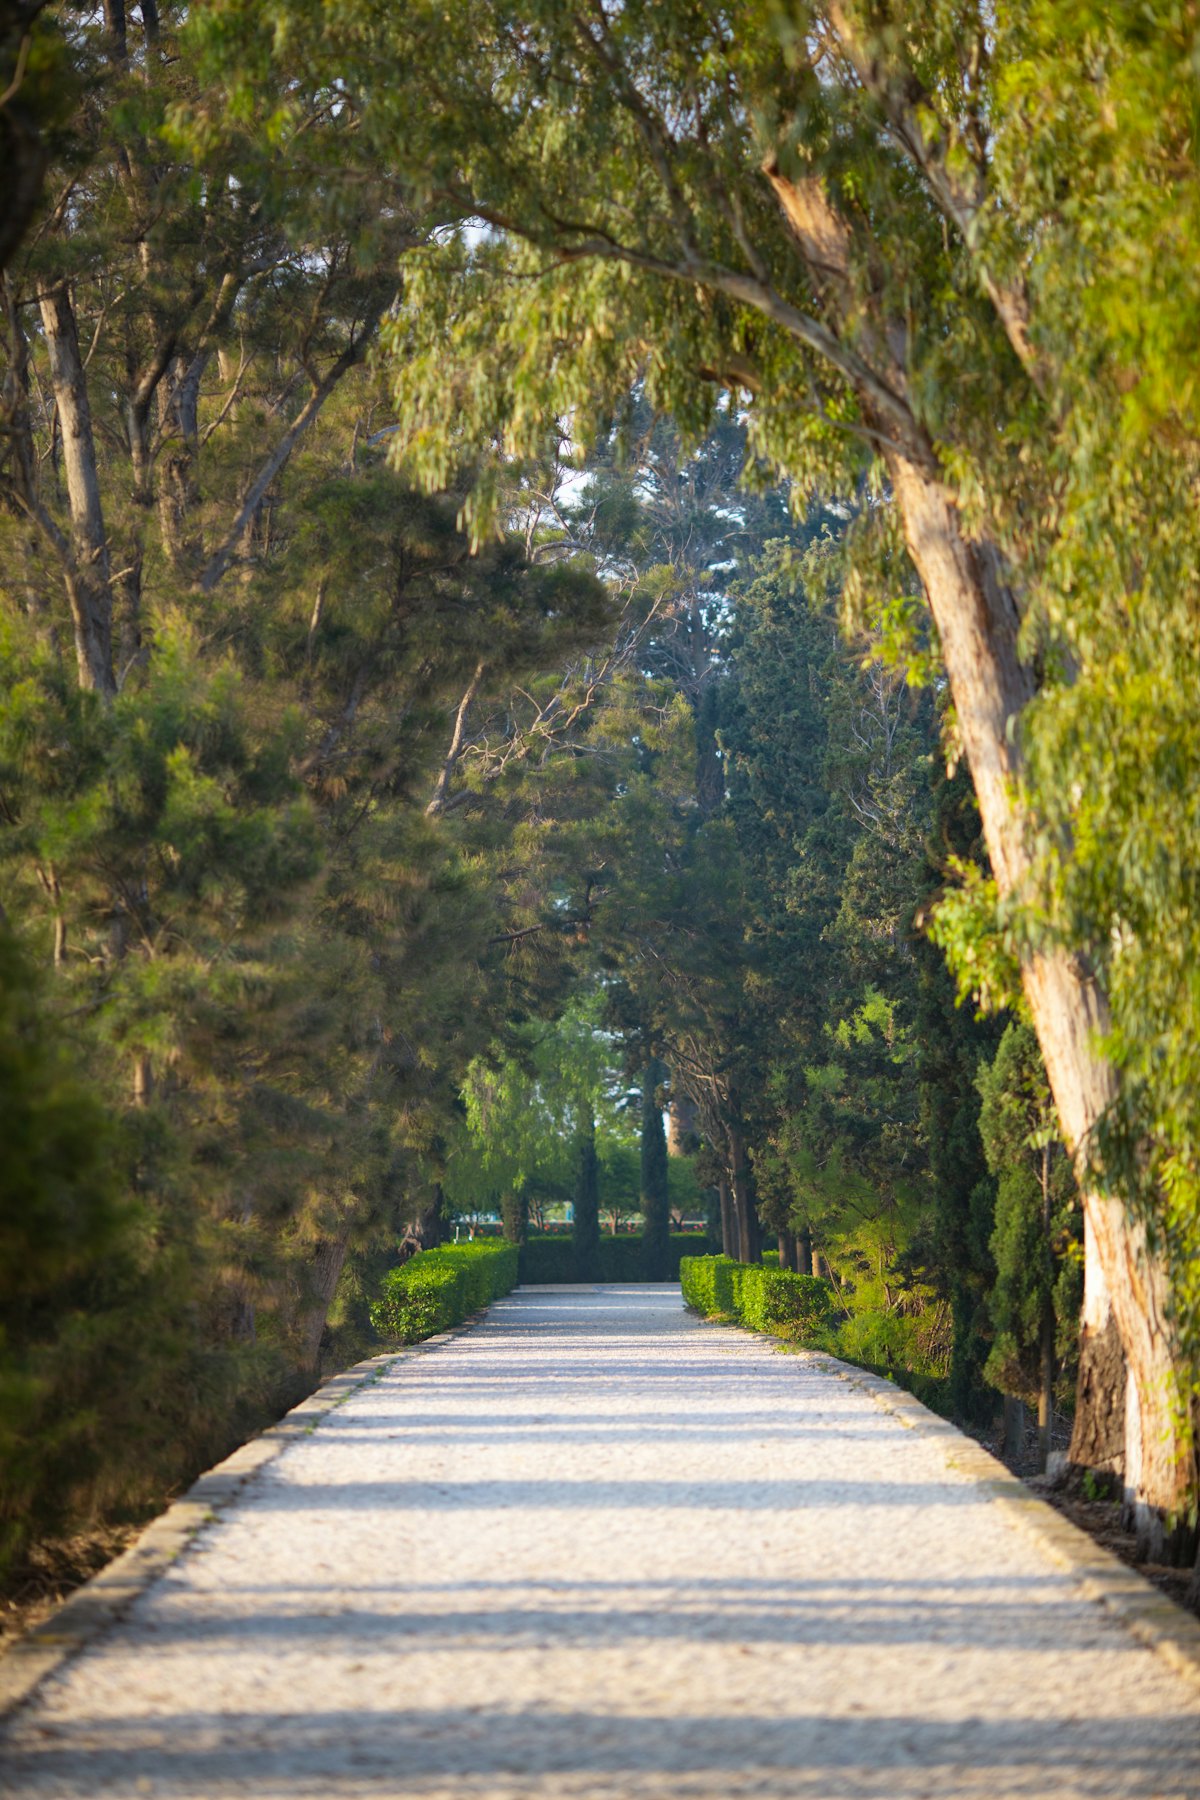 The historic path that leads to the Riḍván Garden, and the gate to the Shrine of ‘Abdu’l-Bahá.